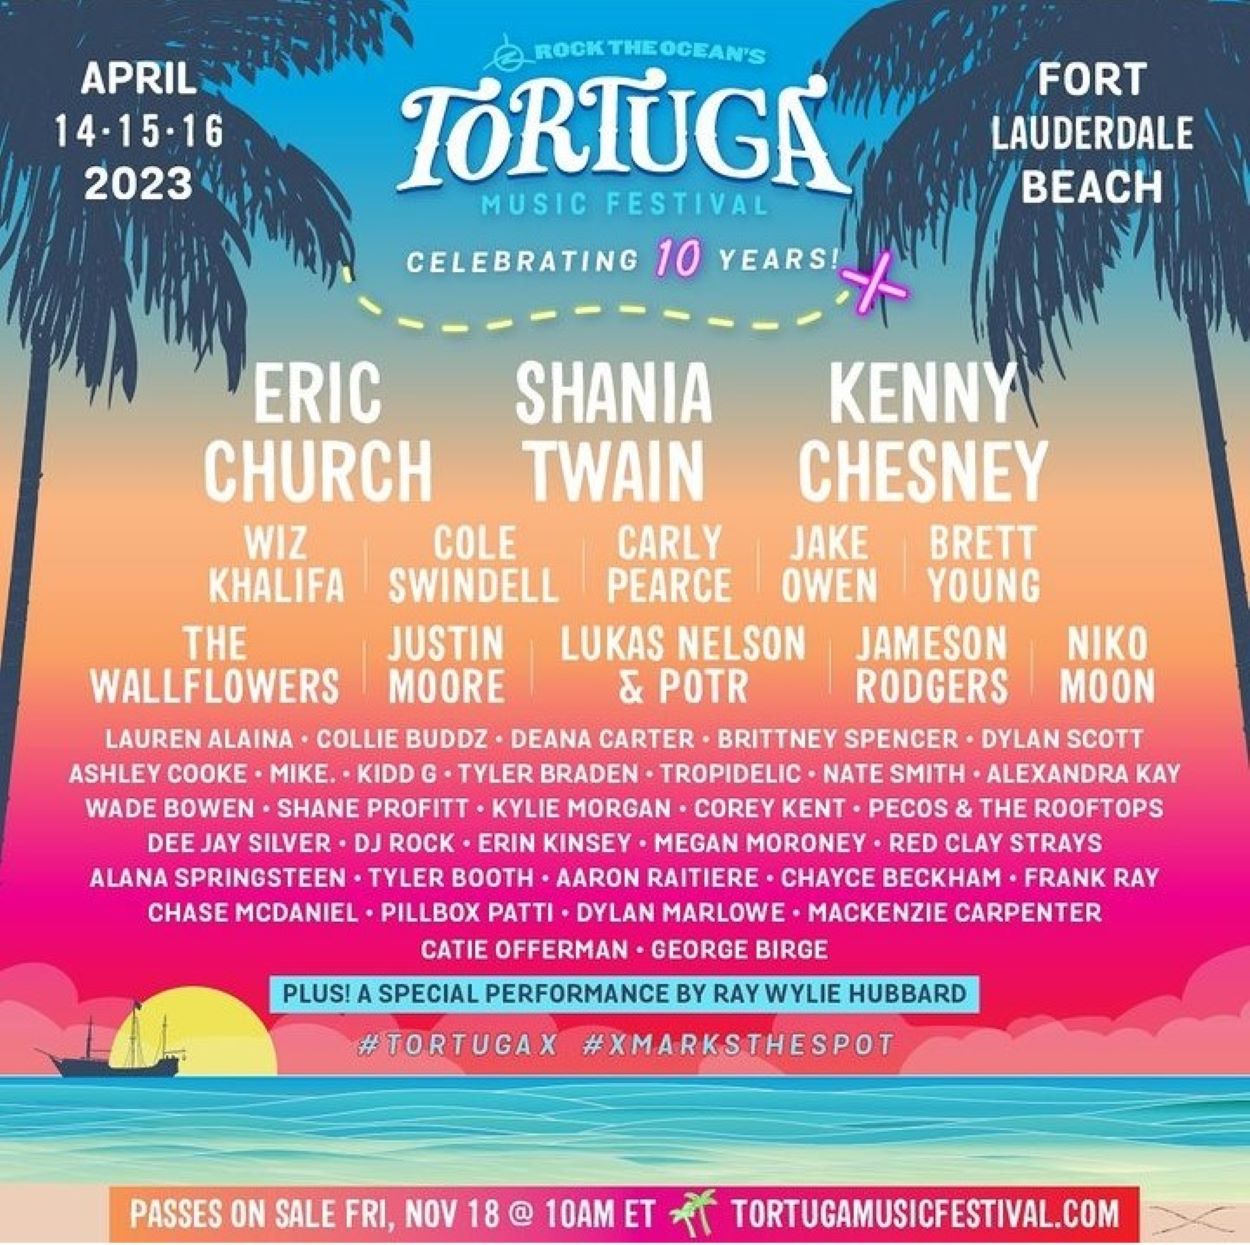 A poster of the Tortuga Music Festival 2023 listing the lineup.